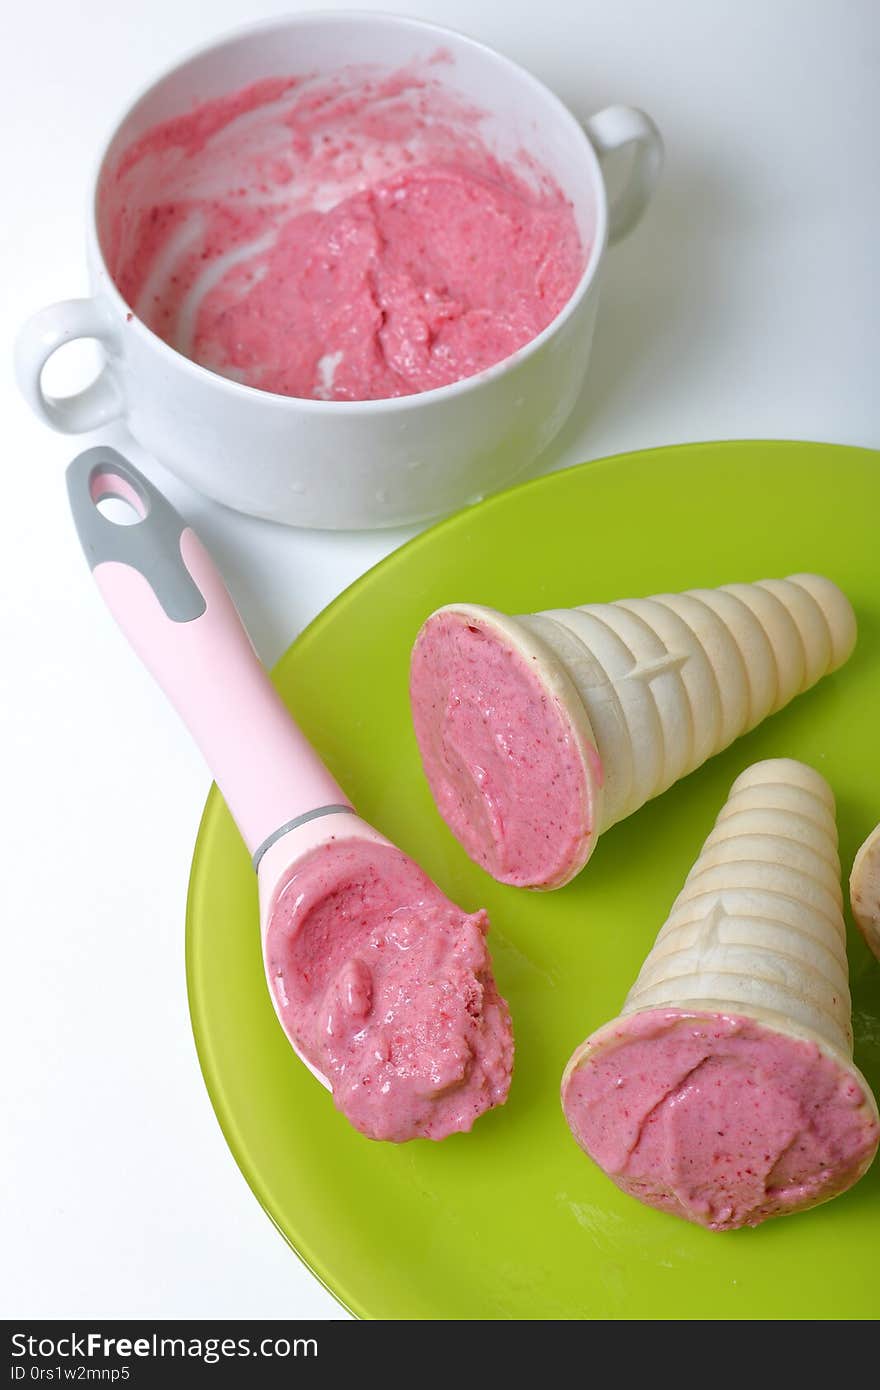 Homemade strawberry and banana ice cream. In edible horns on a plate.